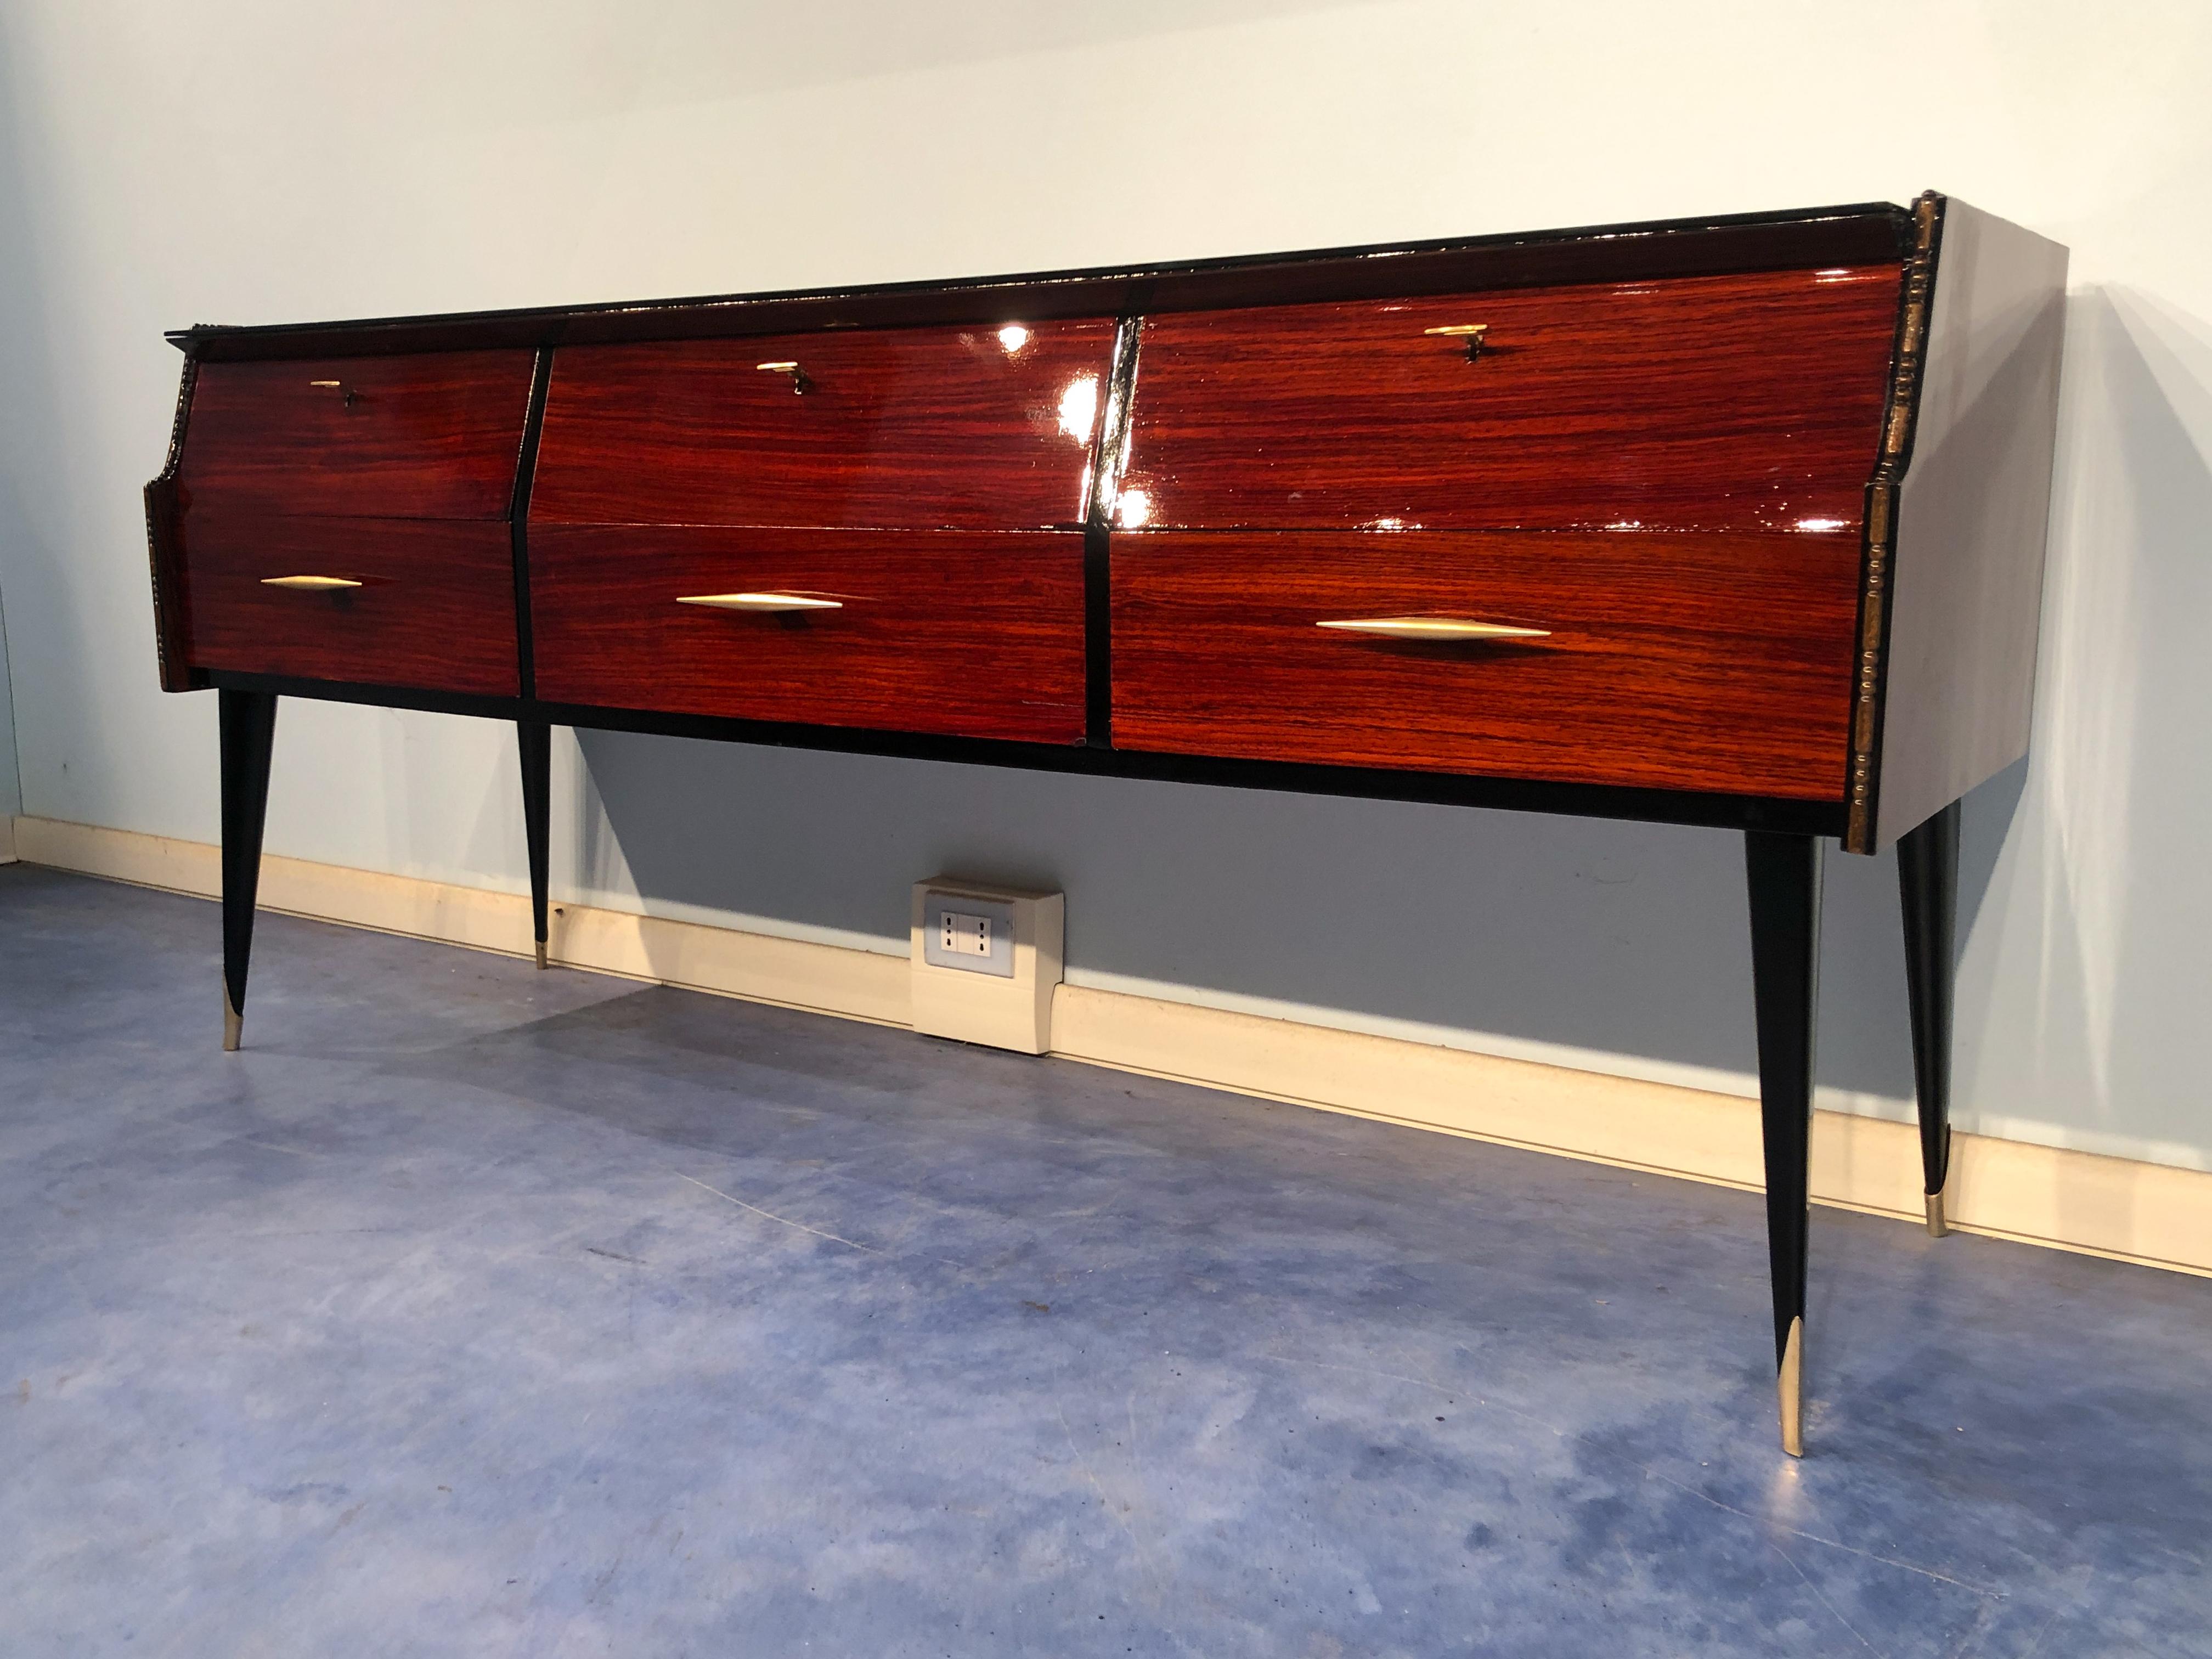 Beautiful Italian midcentury sideboard, or chest of drawers in refined teak with elegant details such as the brass handles and the arched line front. The top is in black glass, the interior of the six drawers are in maple, the legs finish in a